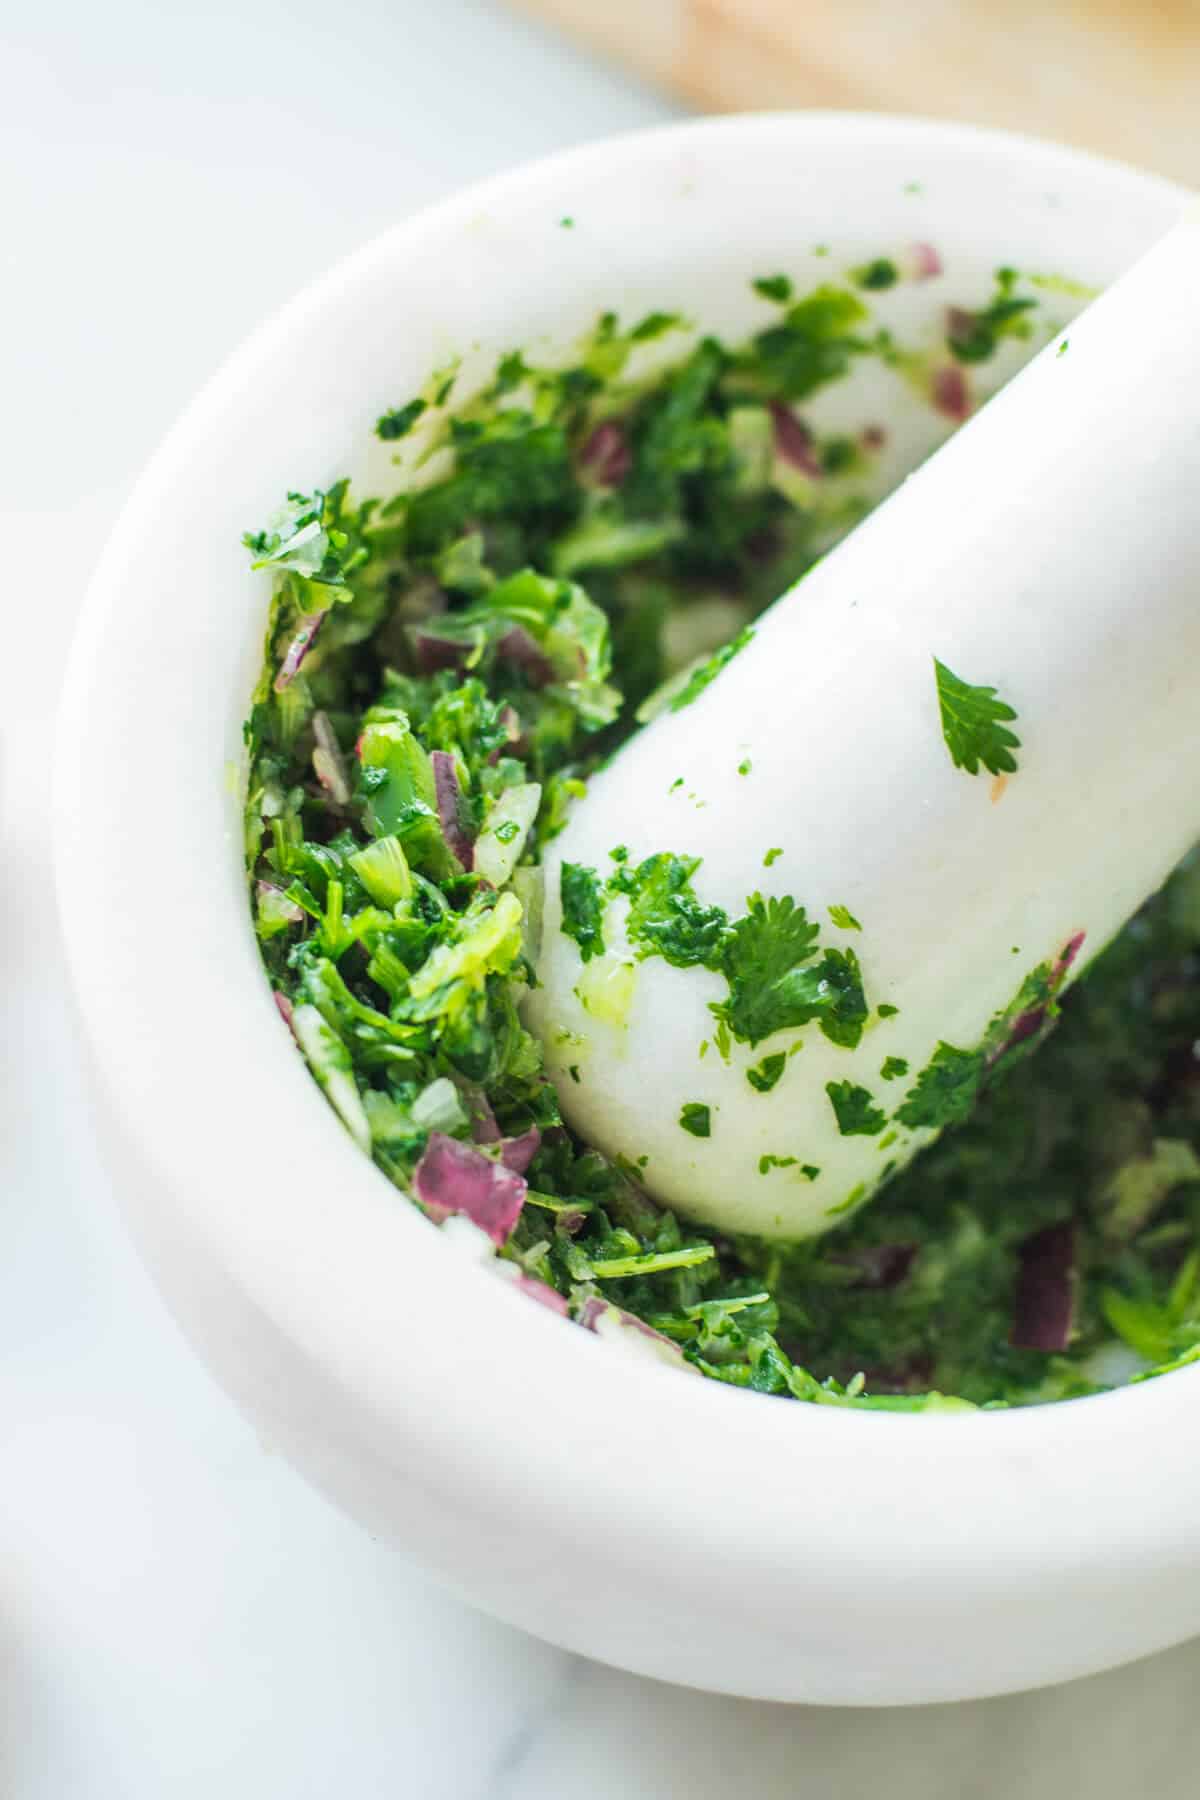 mashed onion and coriander in a white mortar and pestle